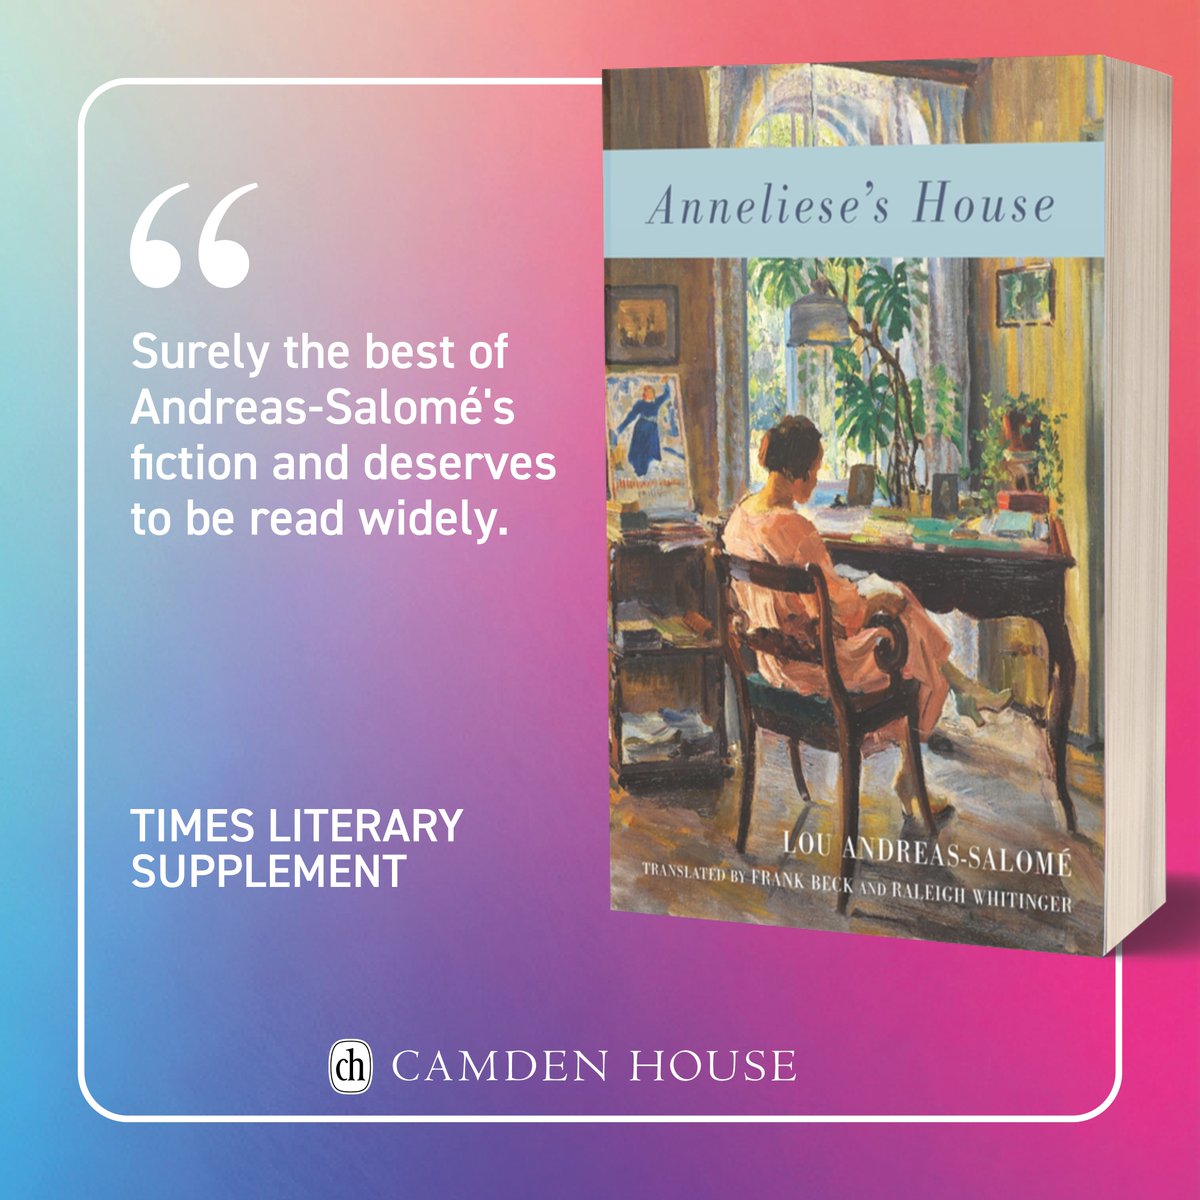 Lou Andreas-Salomé's 'Anneliese's House' is a presciently modern portrayal of emerging #feminist sensibilities in a 19th century family. Save 40% and get free shipping on this translation by Beck and Whitinger, only until 14 April. buff.ly/49fuKDT #BookSale